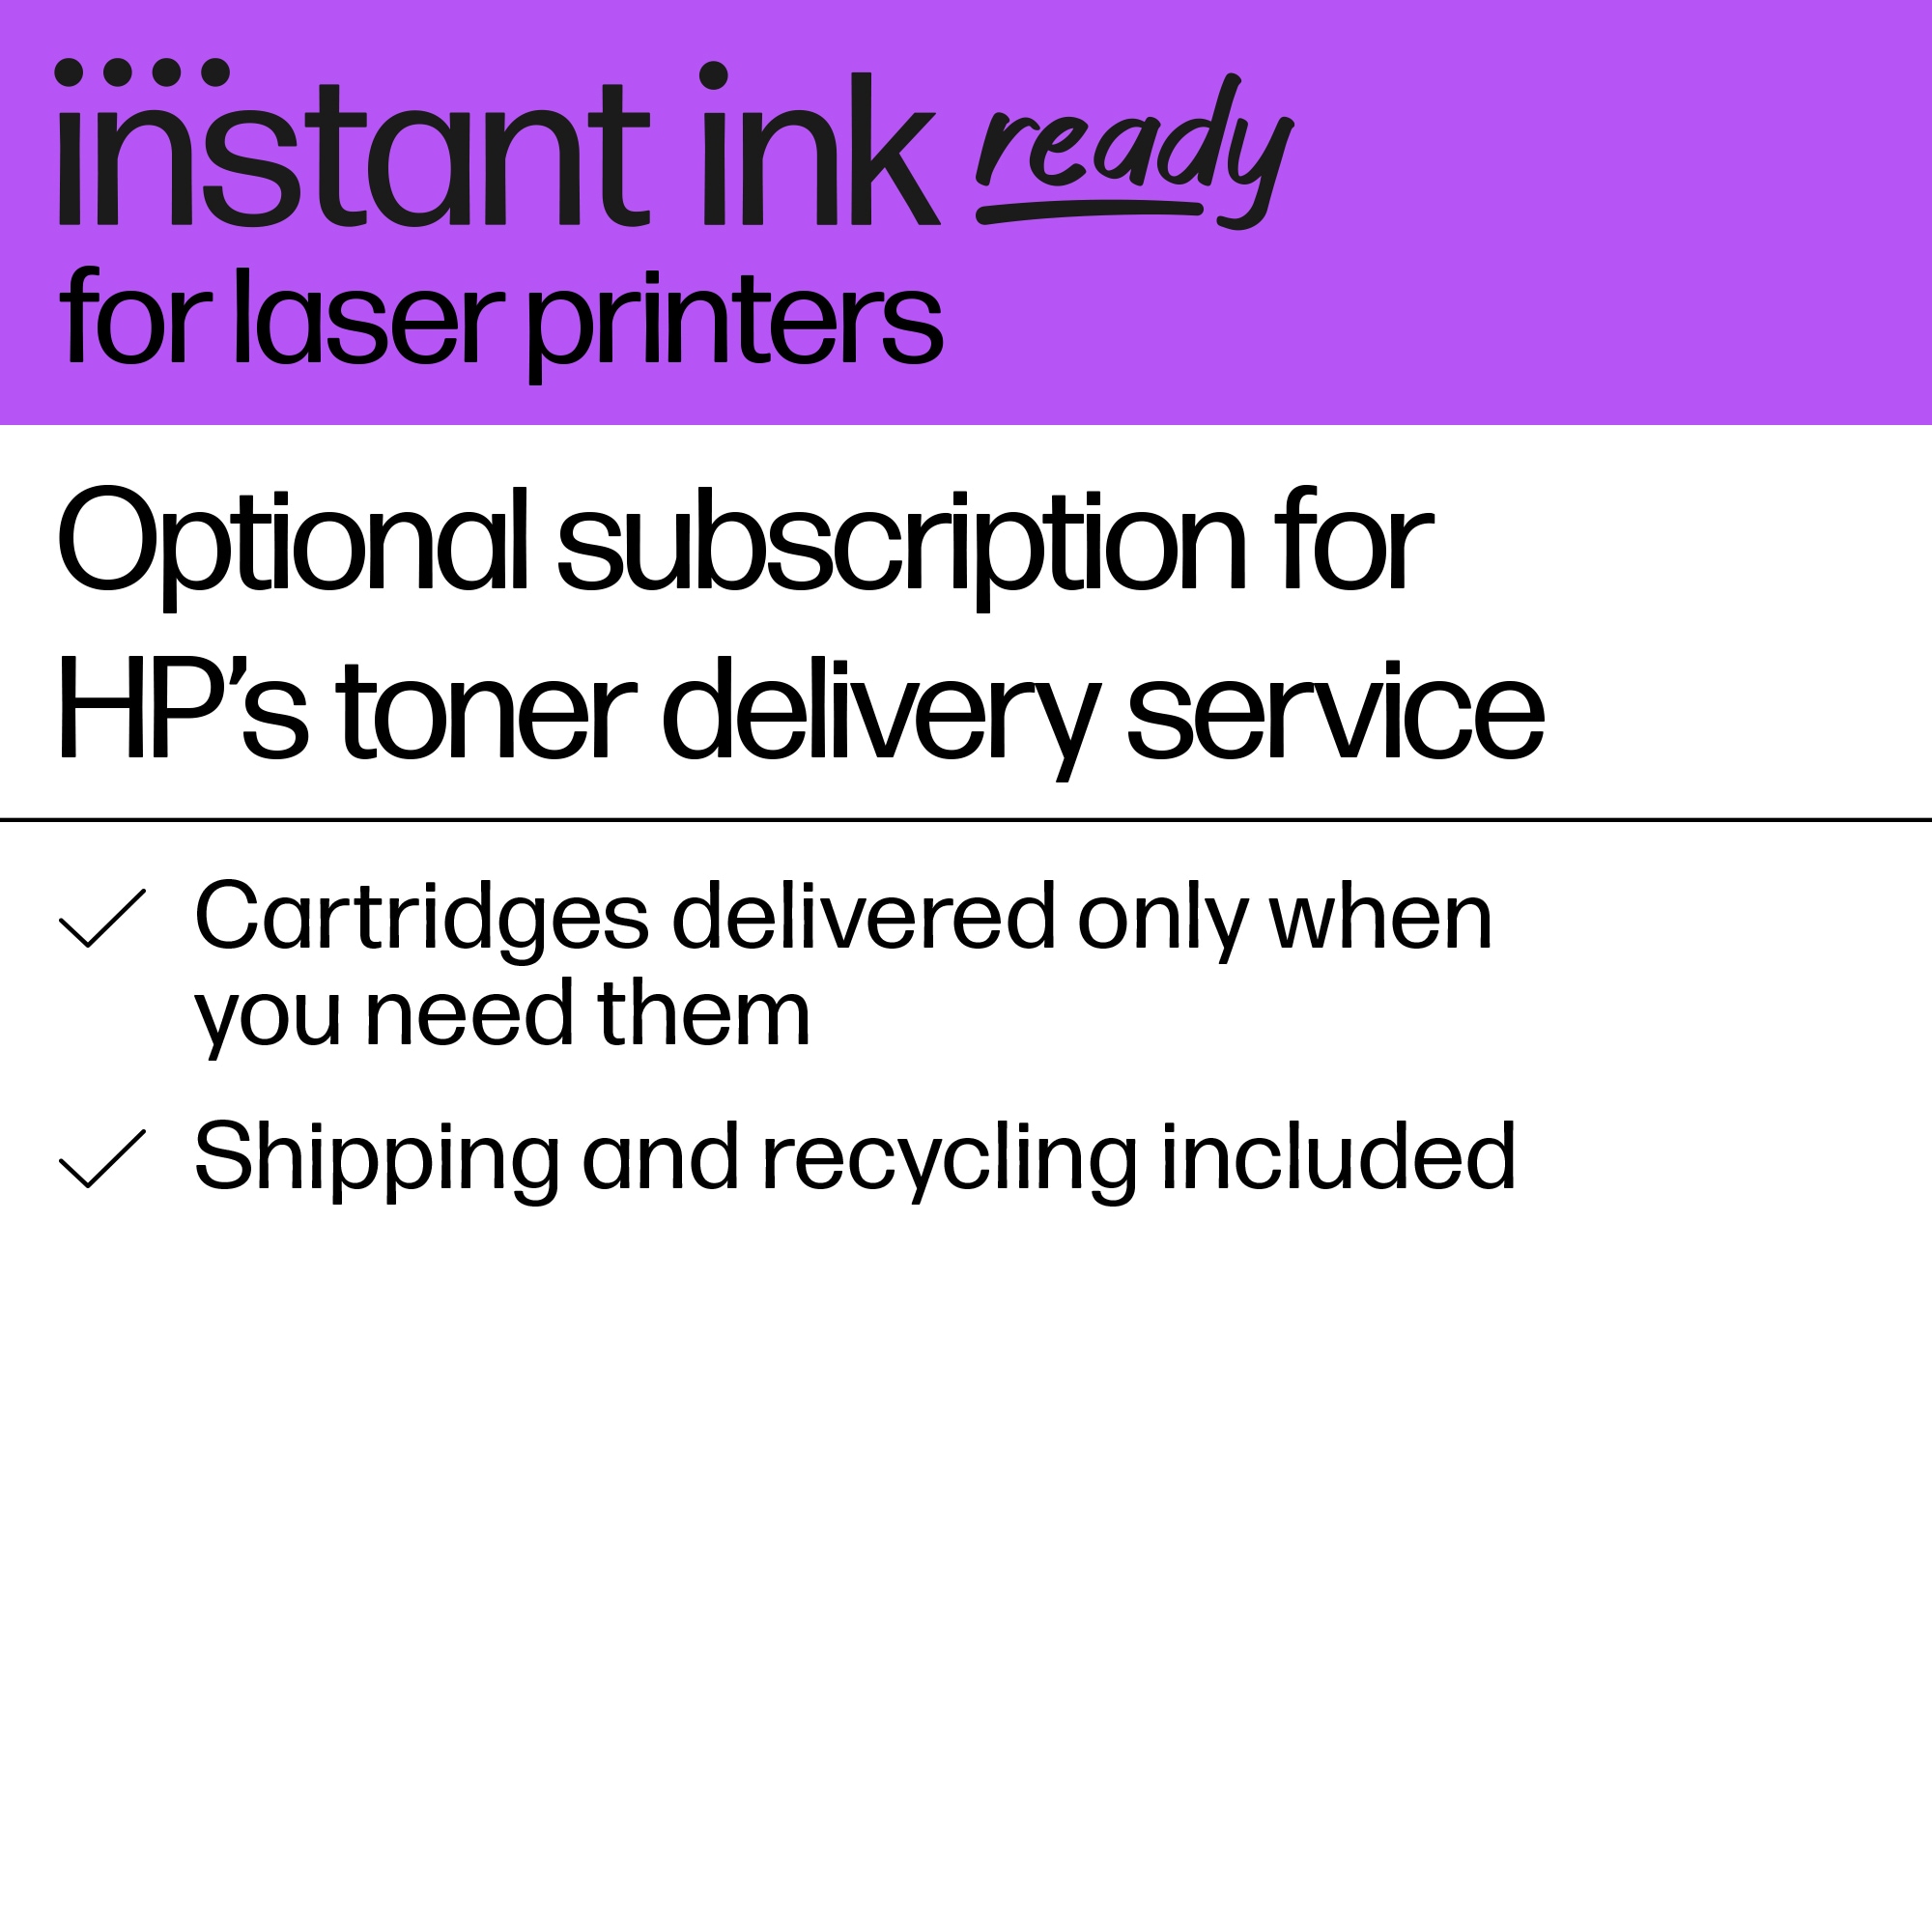 HP LaserJet MFP M234sdw Printer with available 2 months Instant Ink | Laserdrucker